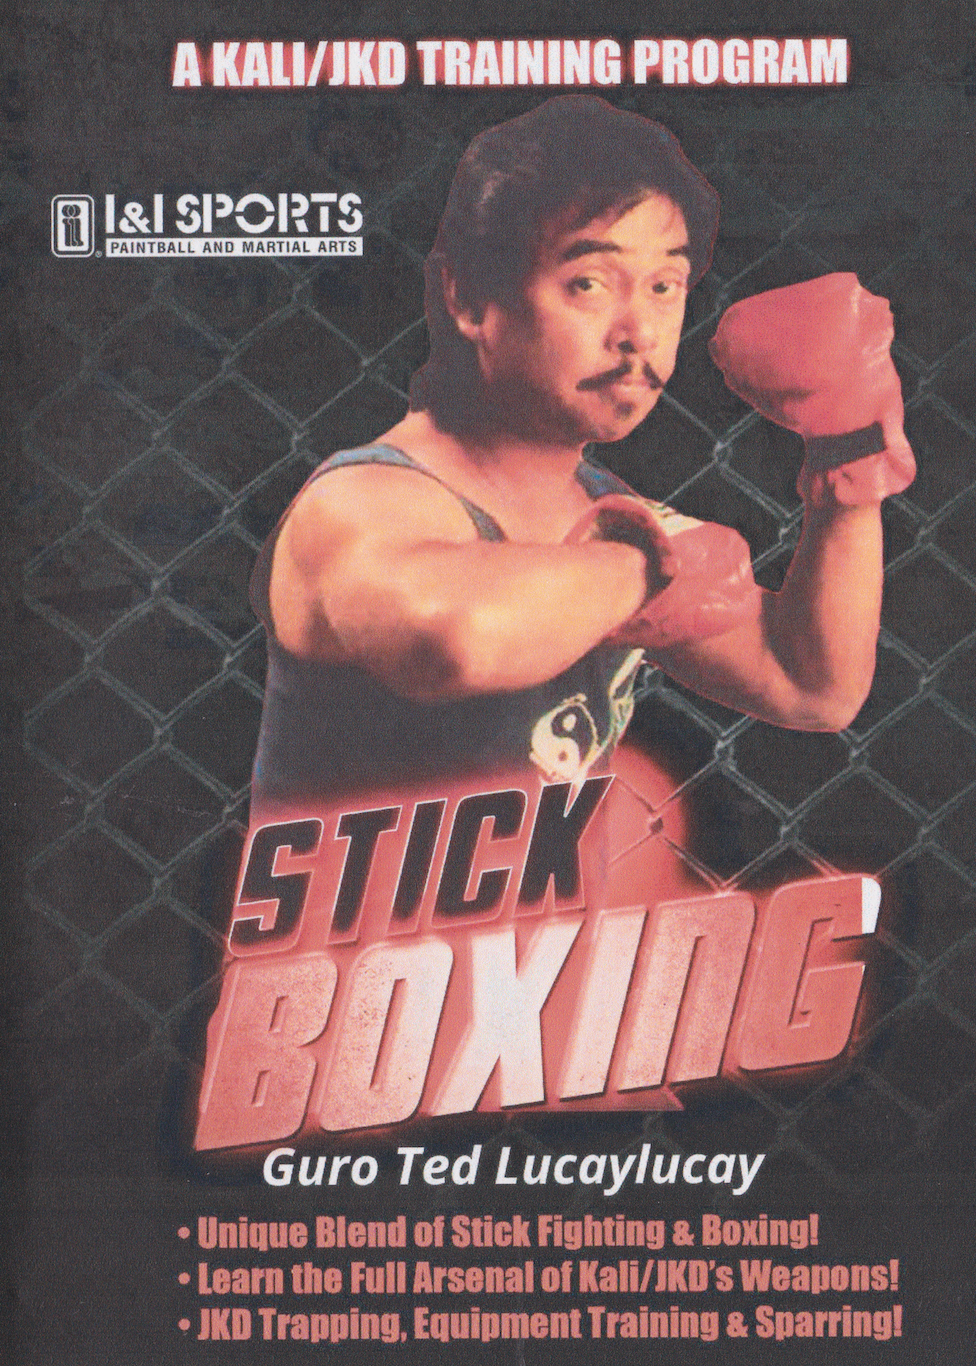 DVD de Stickboxing con Ted Lucaylucay 